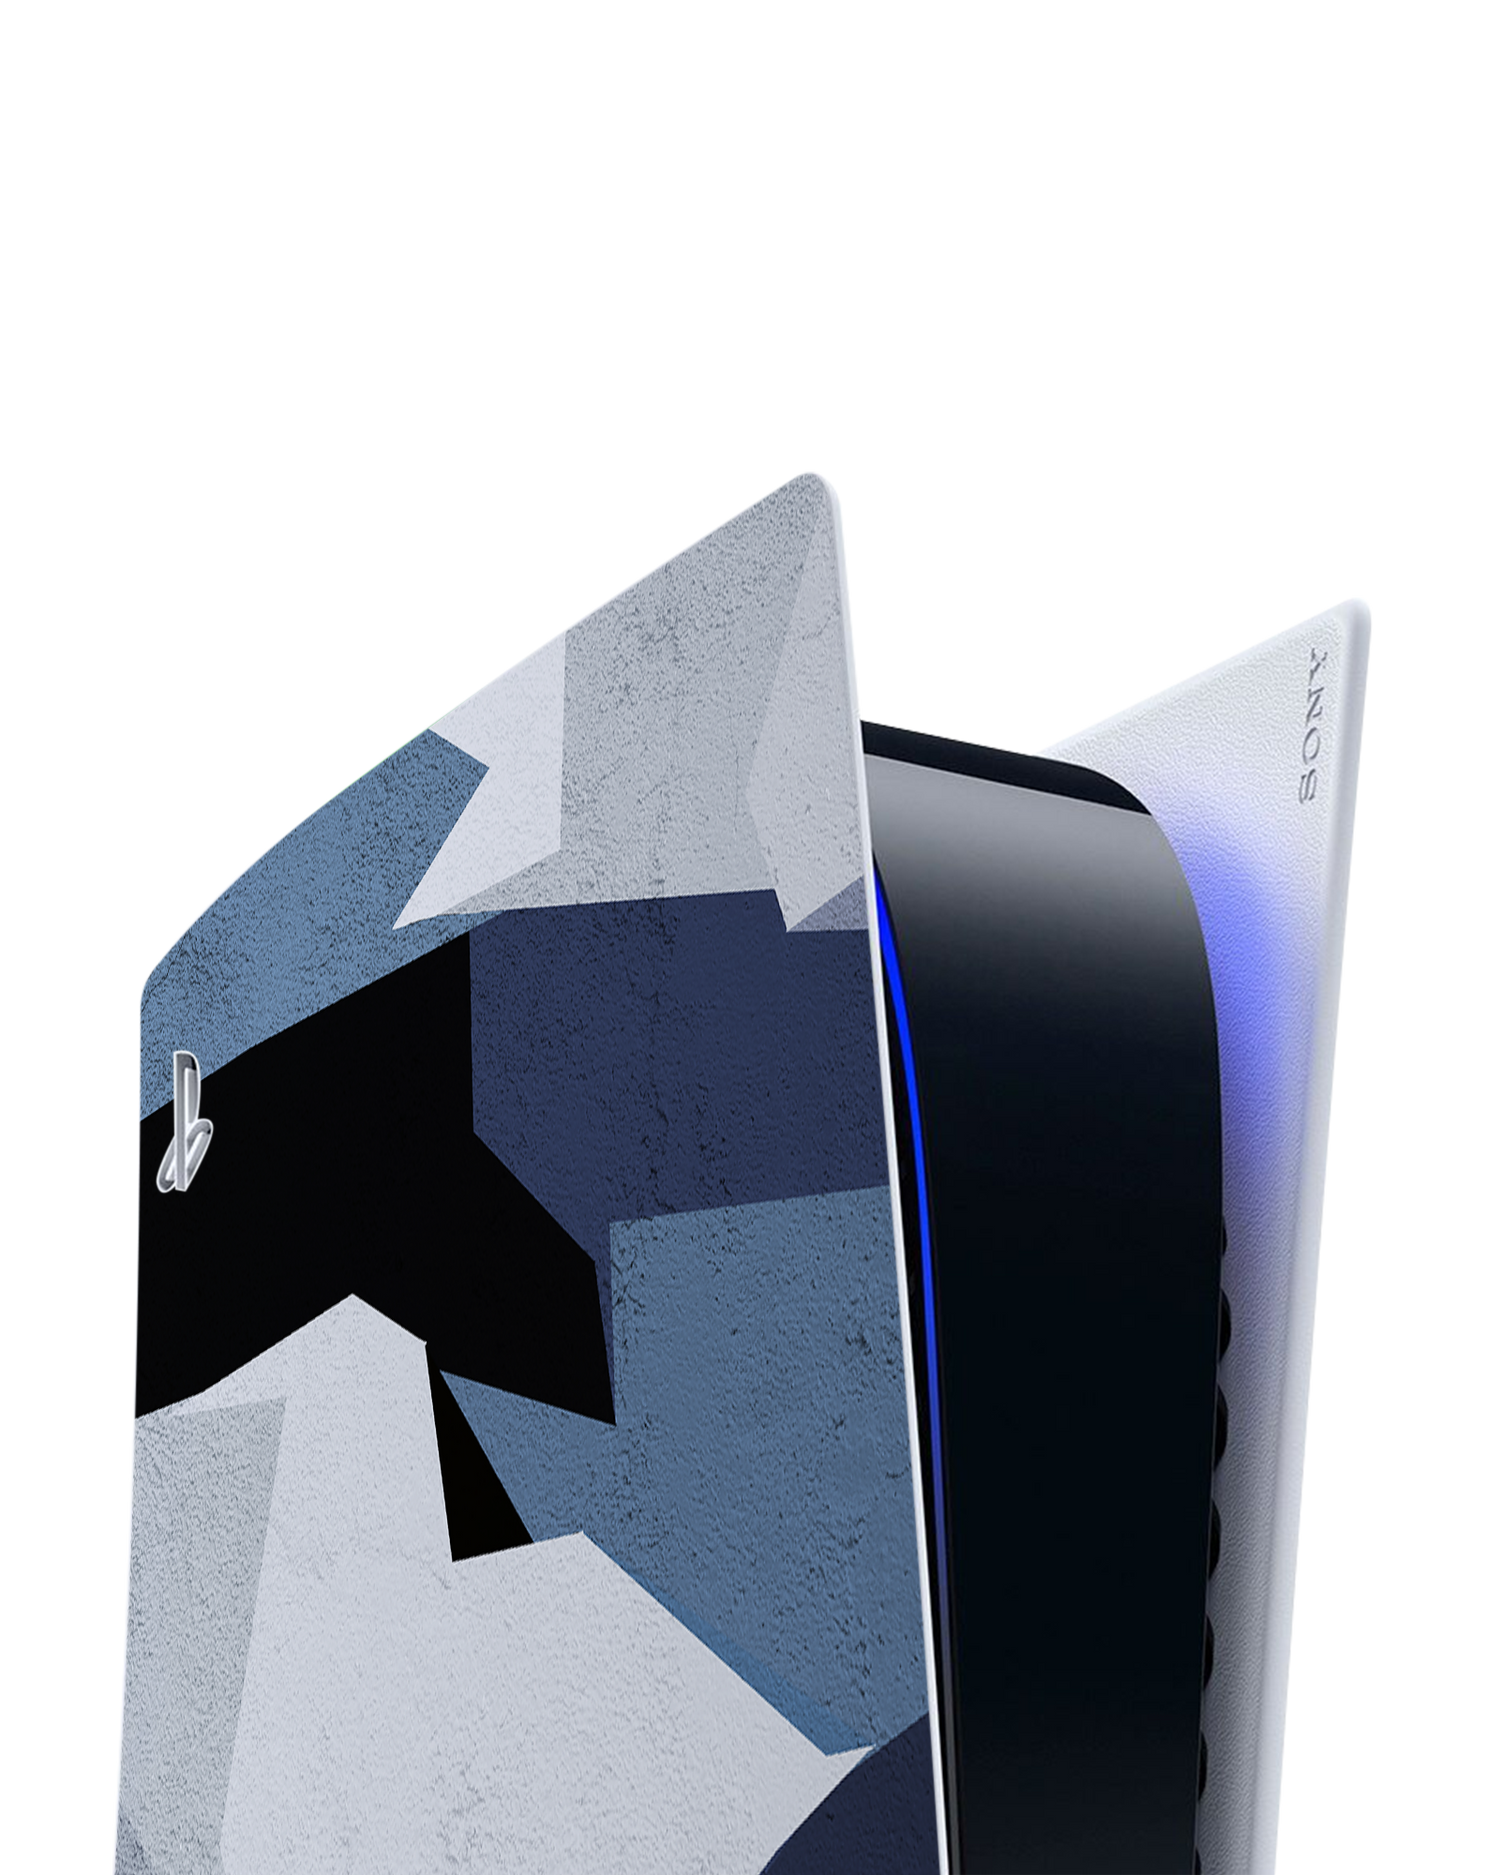 Geometric Camo Blue Console Skin for Sony PlayStation 5: Detail shot